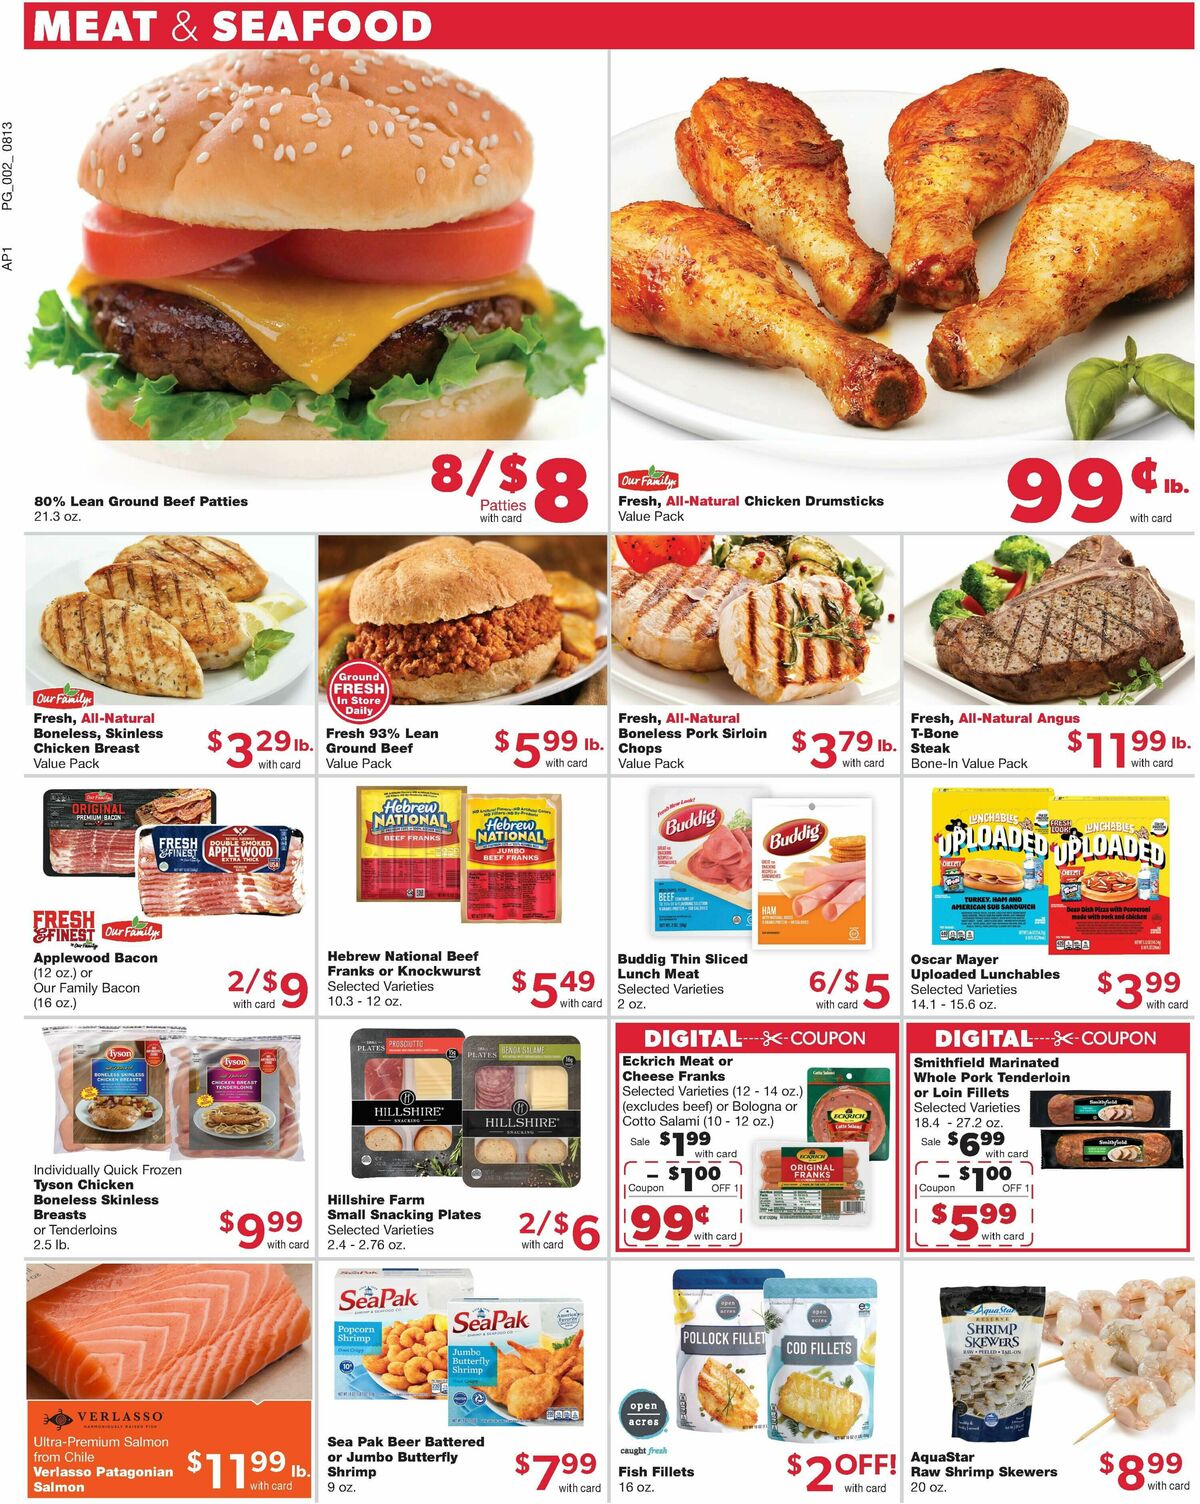 Family Fare Weekly Ad from August 13